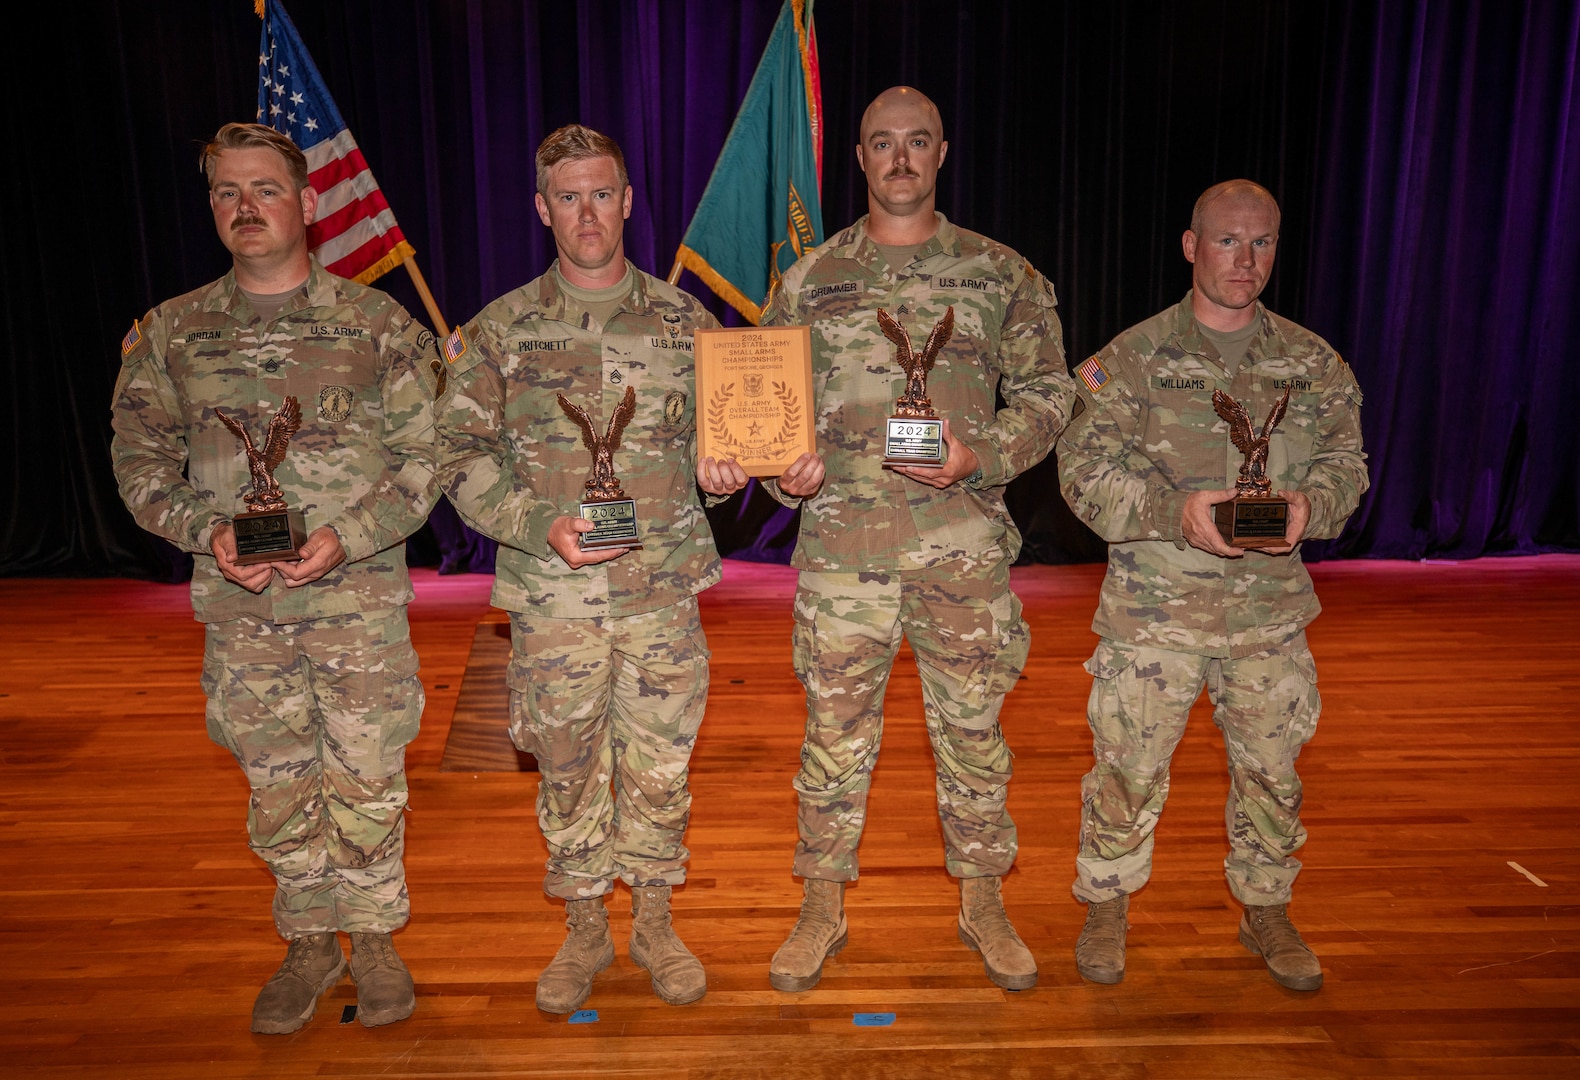 Staff Sgt. John Jordan of the South Carolina National Guard won the title of 2024 All Army Champion at the U.S. Army Small Arms Championships at Fort Moore, Georgia, March 10-16. Jordan’s team, South Carolina Alpha, also claimed the title of 2024 U.S. Army Small Arms Team Champions.